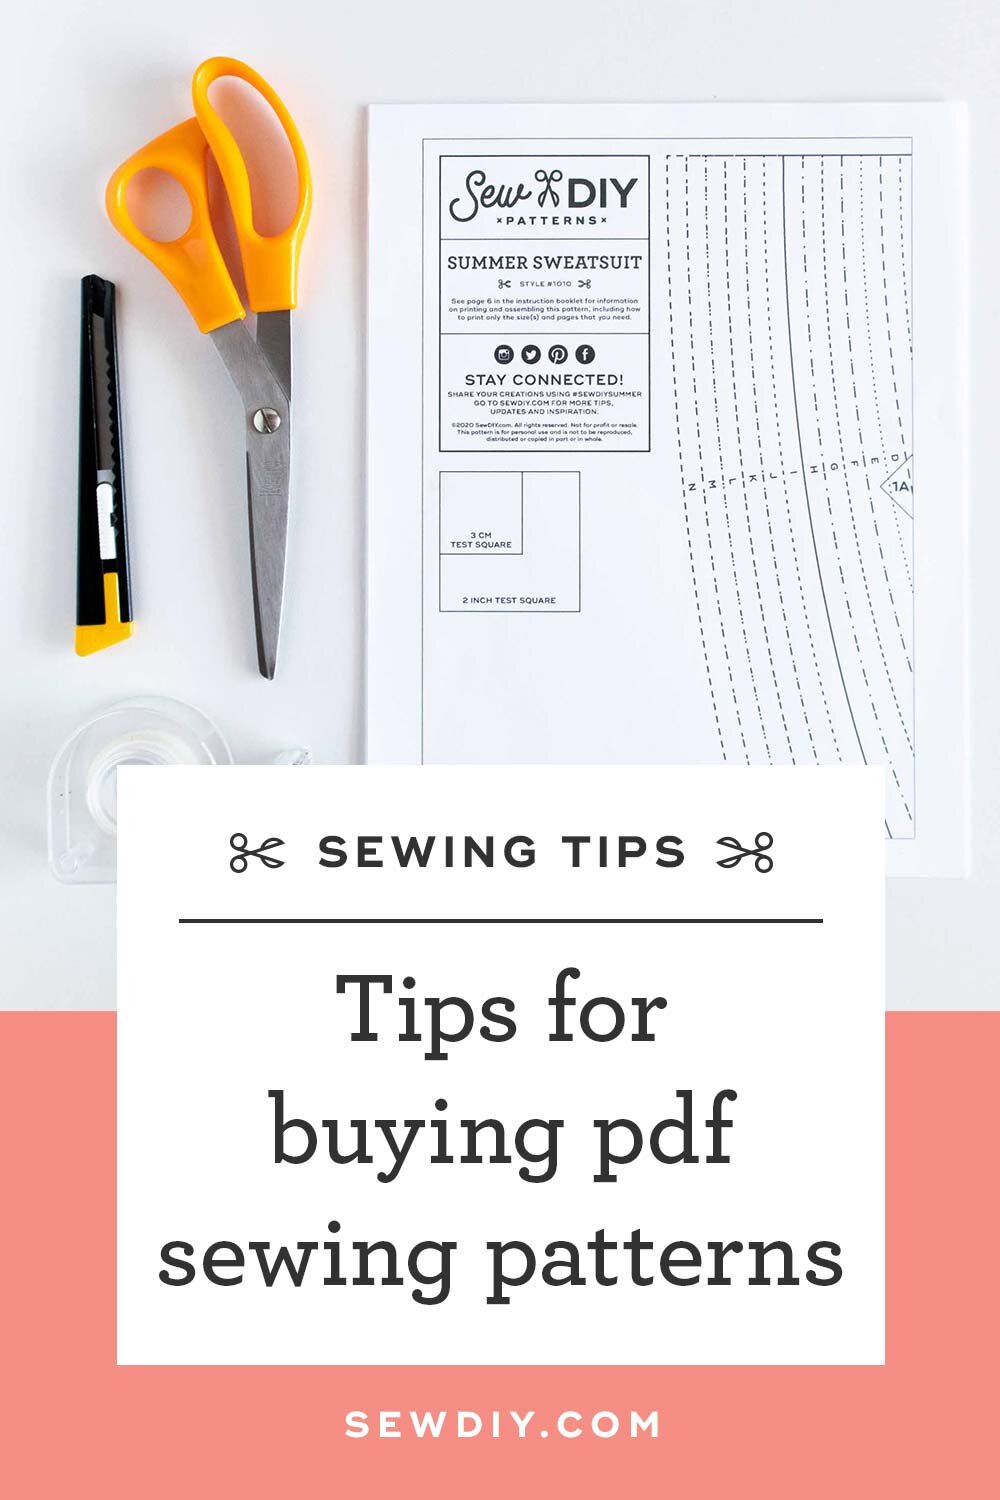 Tips for buying your first pdf sewing pattern from Sew DIY